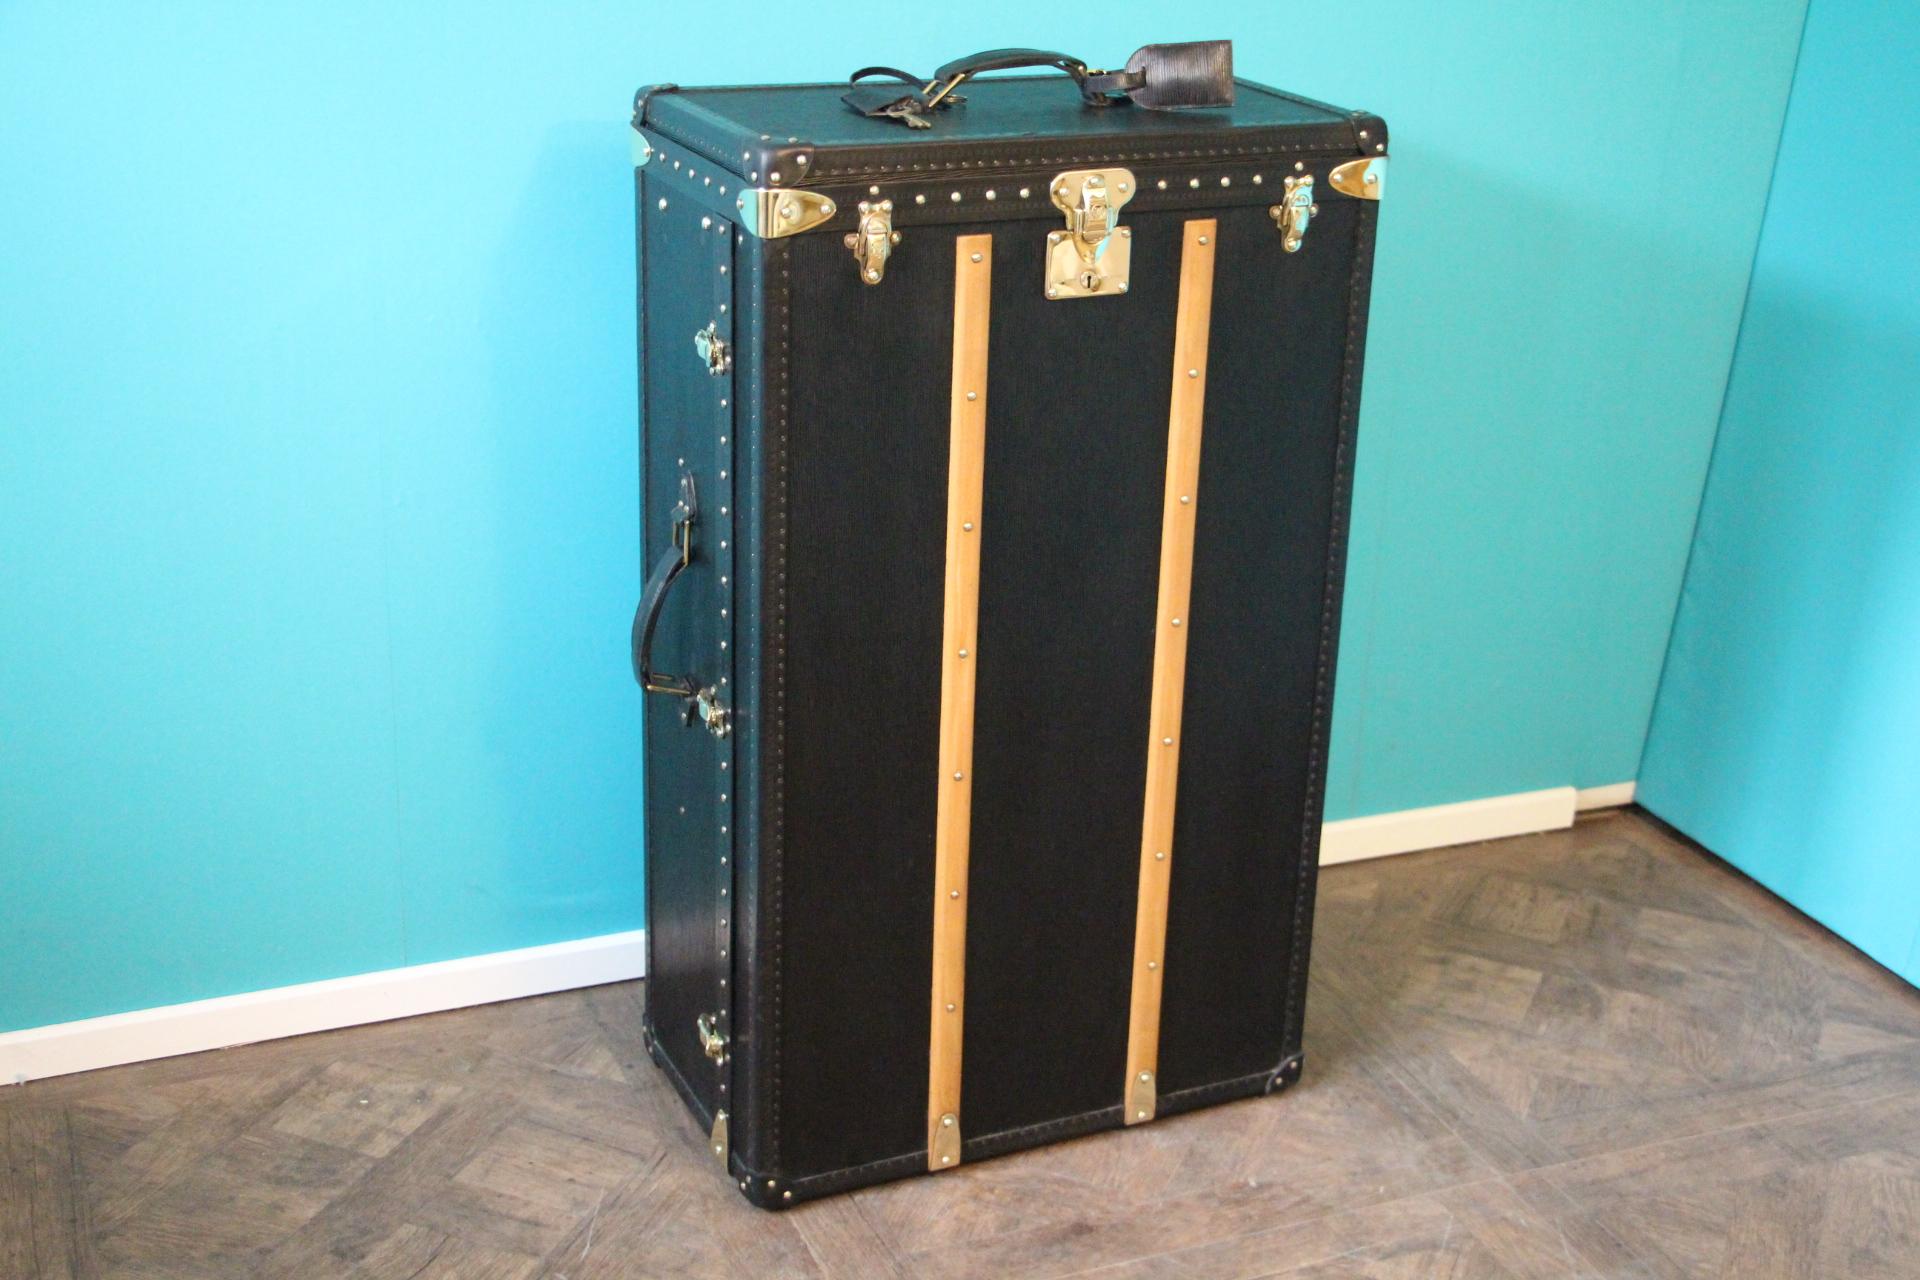 Unusual and top of the range Louis Vuitton trunk, all black epi leather, black leather trim, Louis Vuitton stamped solid brass studs, clasps and main lock.
2 leather handles, one on the top and one on the side.
2 keys, Louis Vuitton key clochette